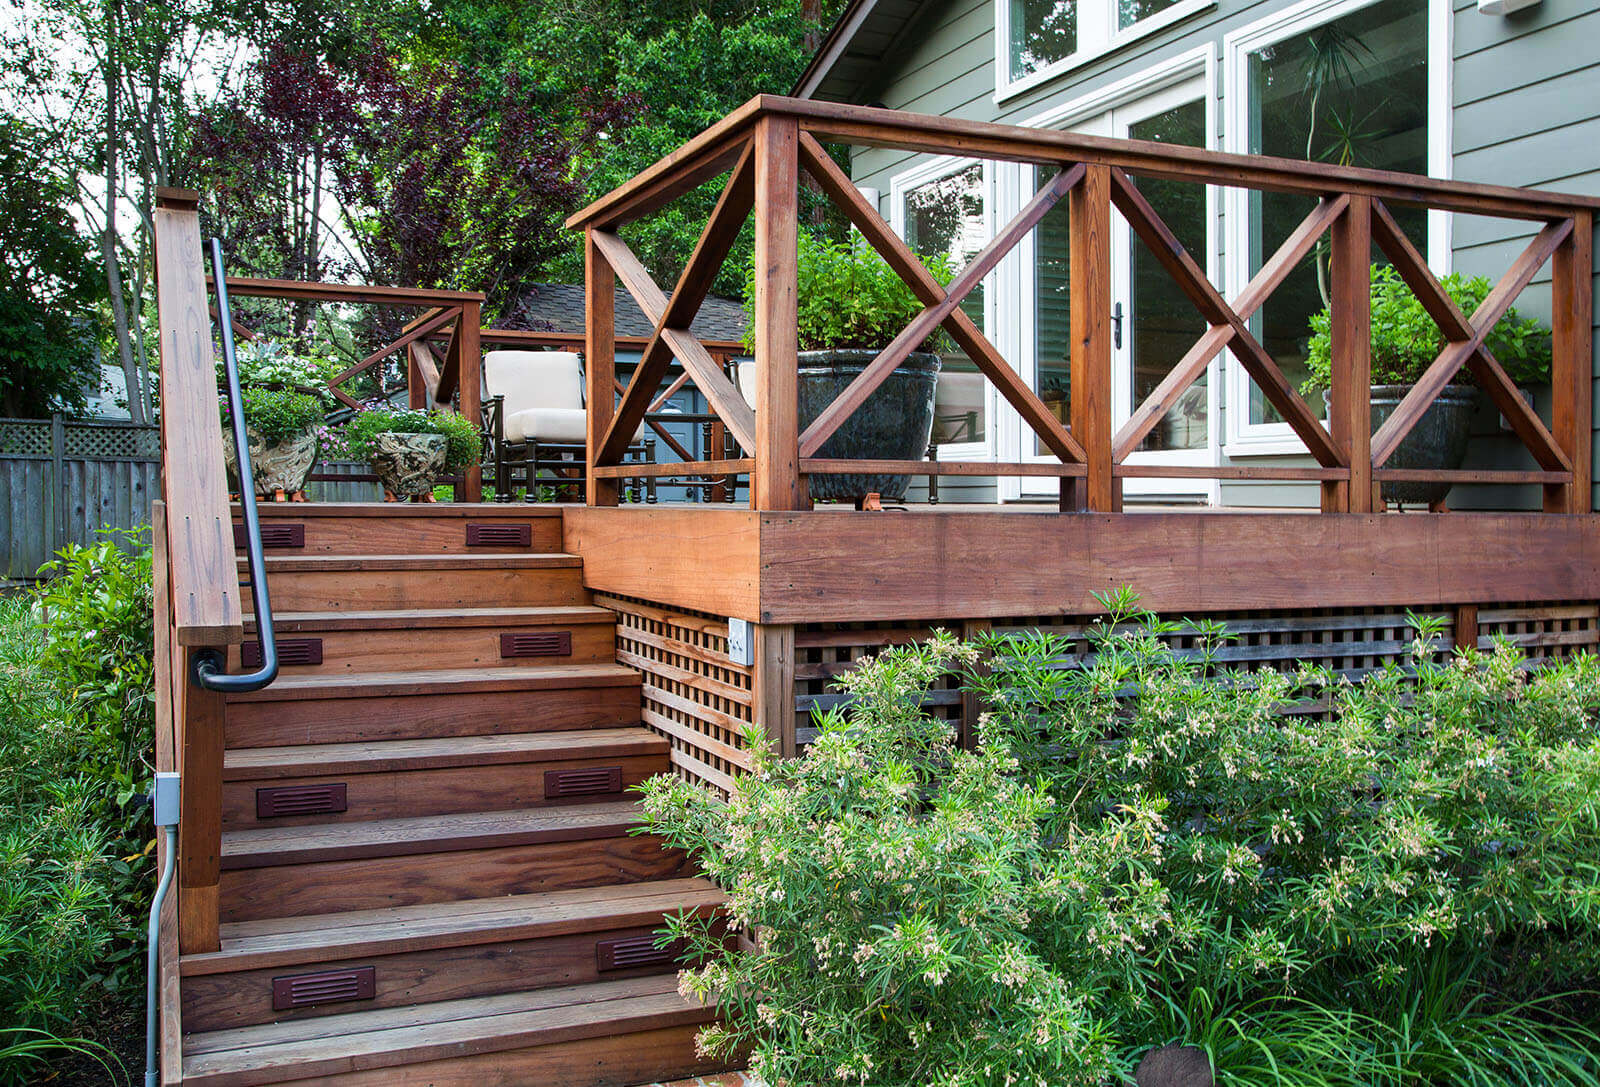 wooden lattice base elevated dark wood deck with dark wood stairs, and railings leading from greenery in the yard